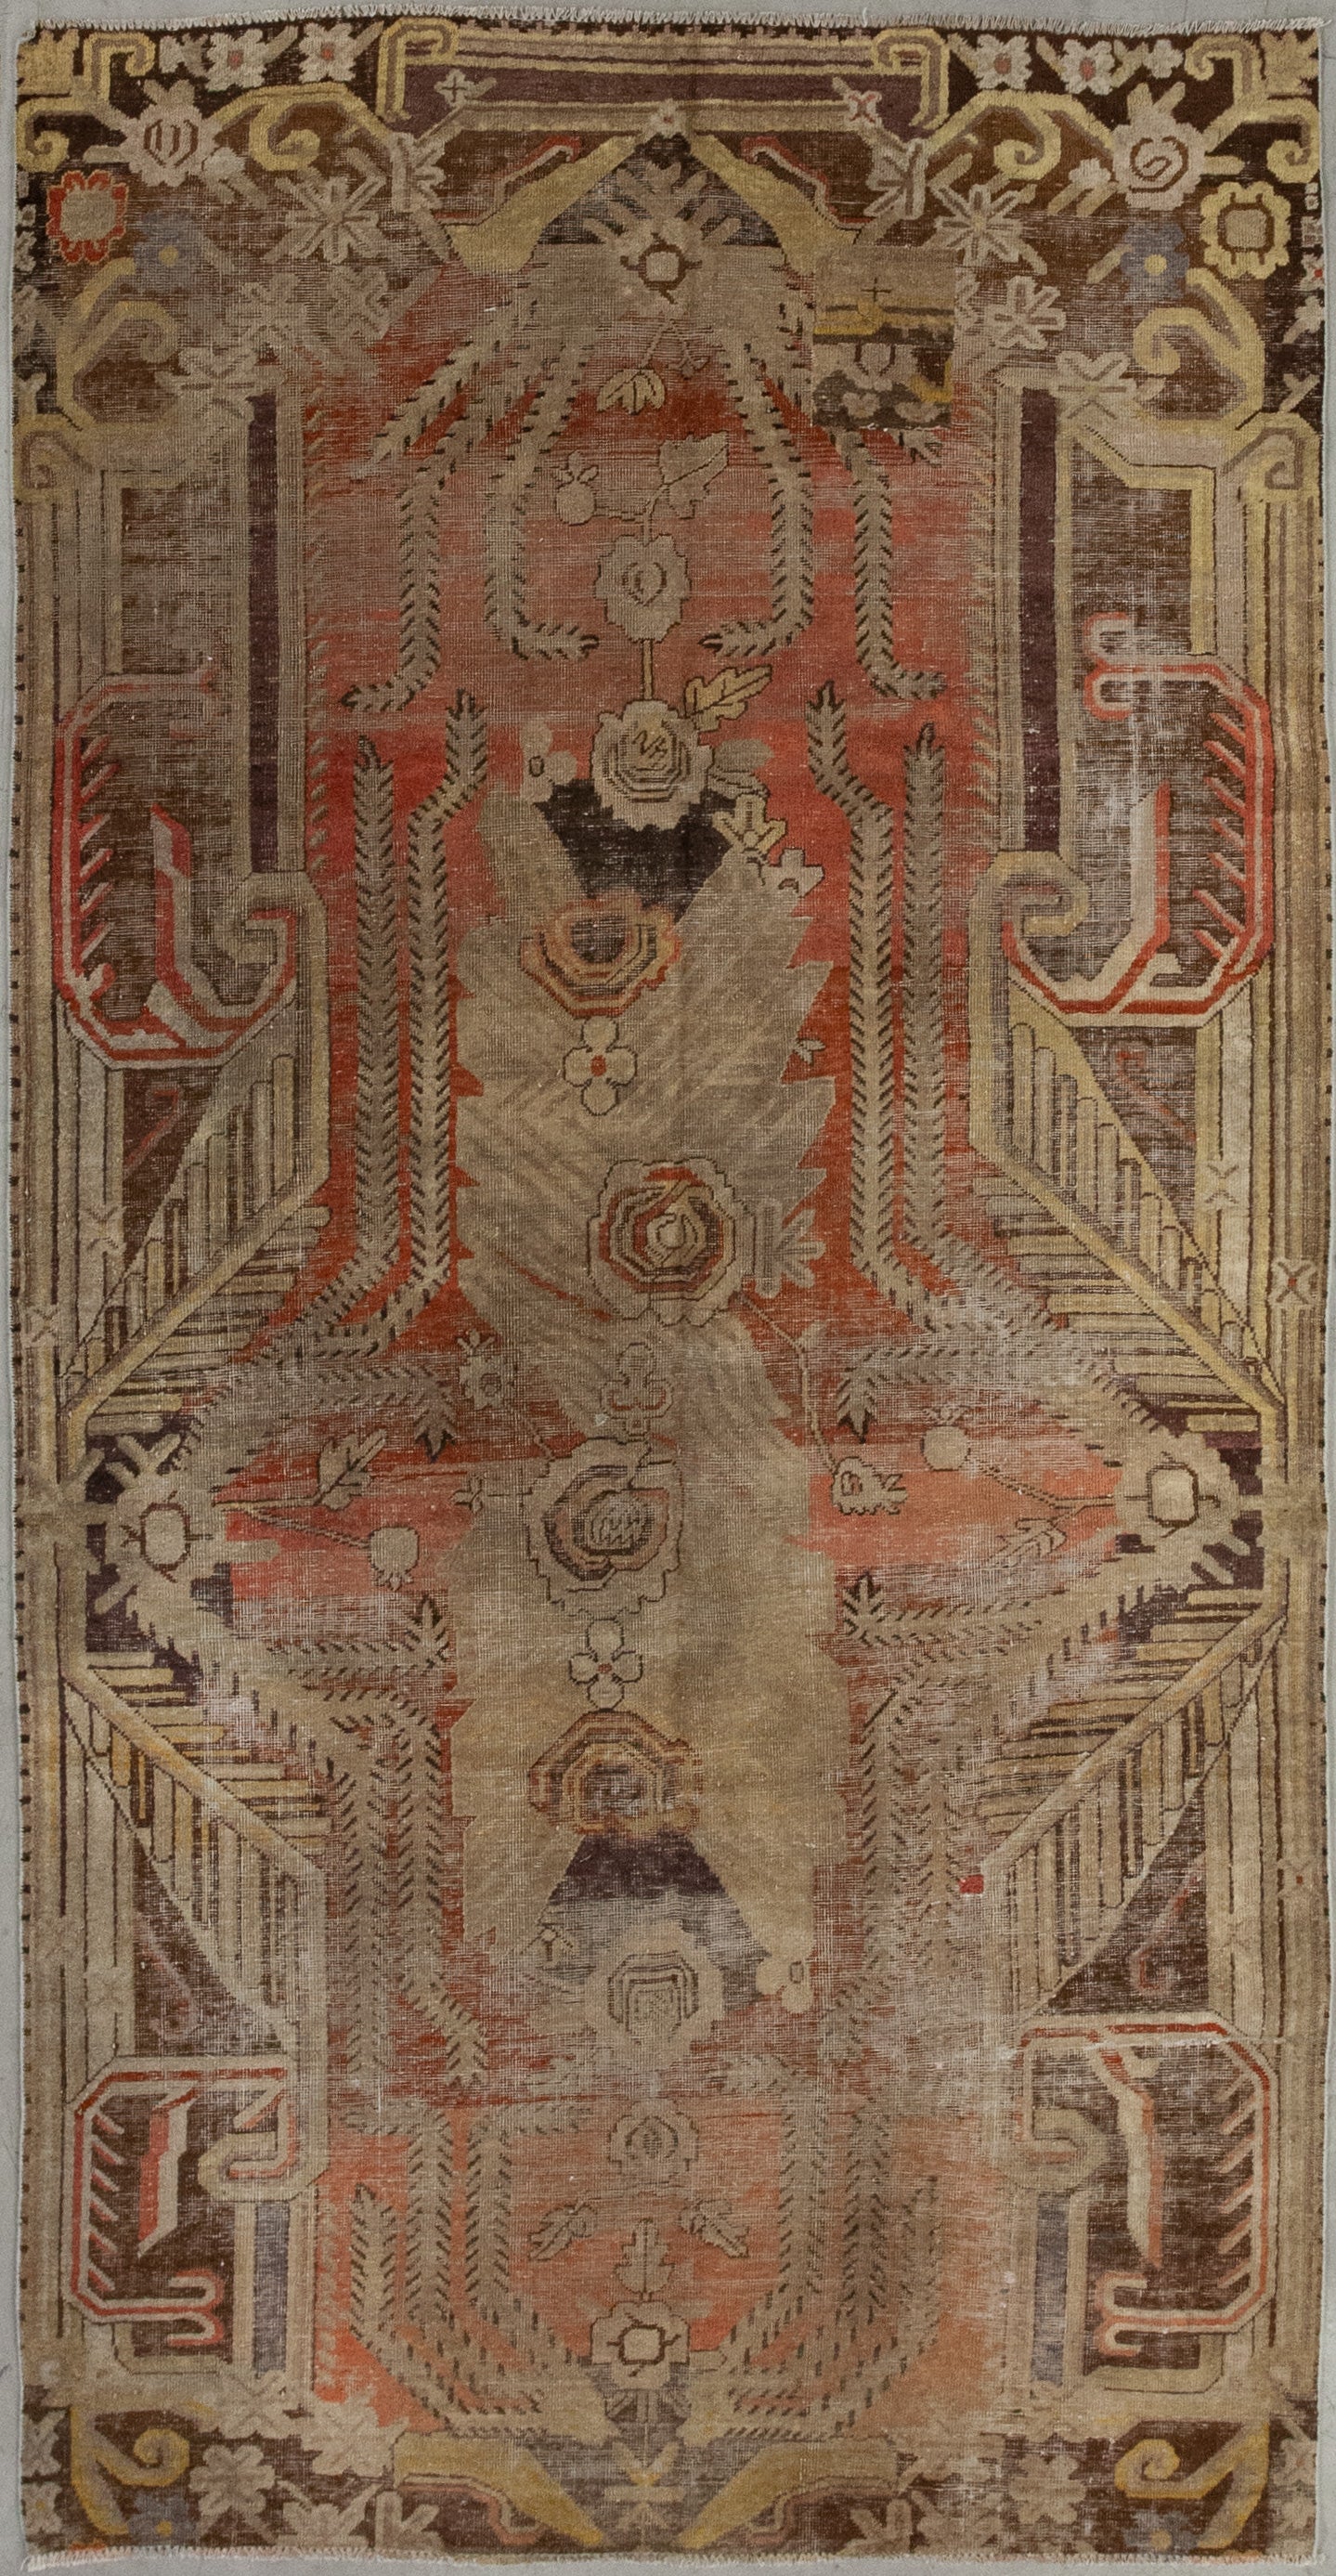 This slightly strange carpet was woven with an exciting color scheme that comes with orange for the central background, gold for the contour, and brown and beige for the details.